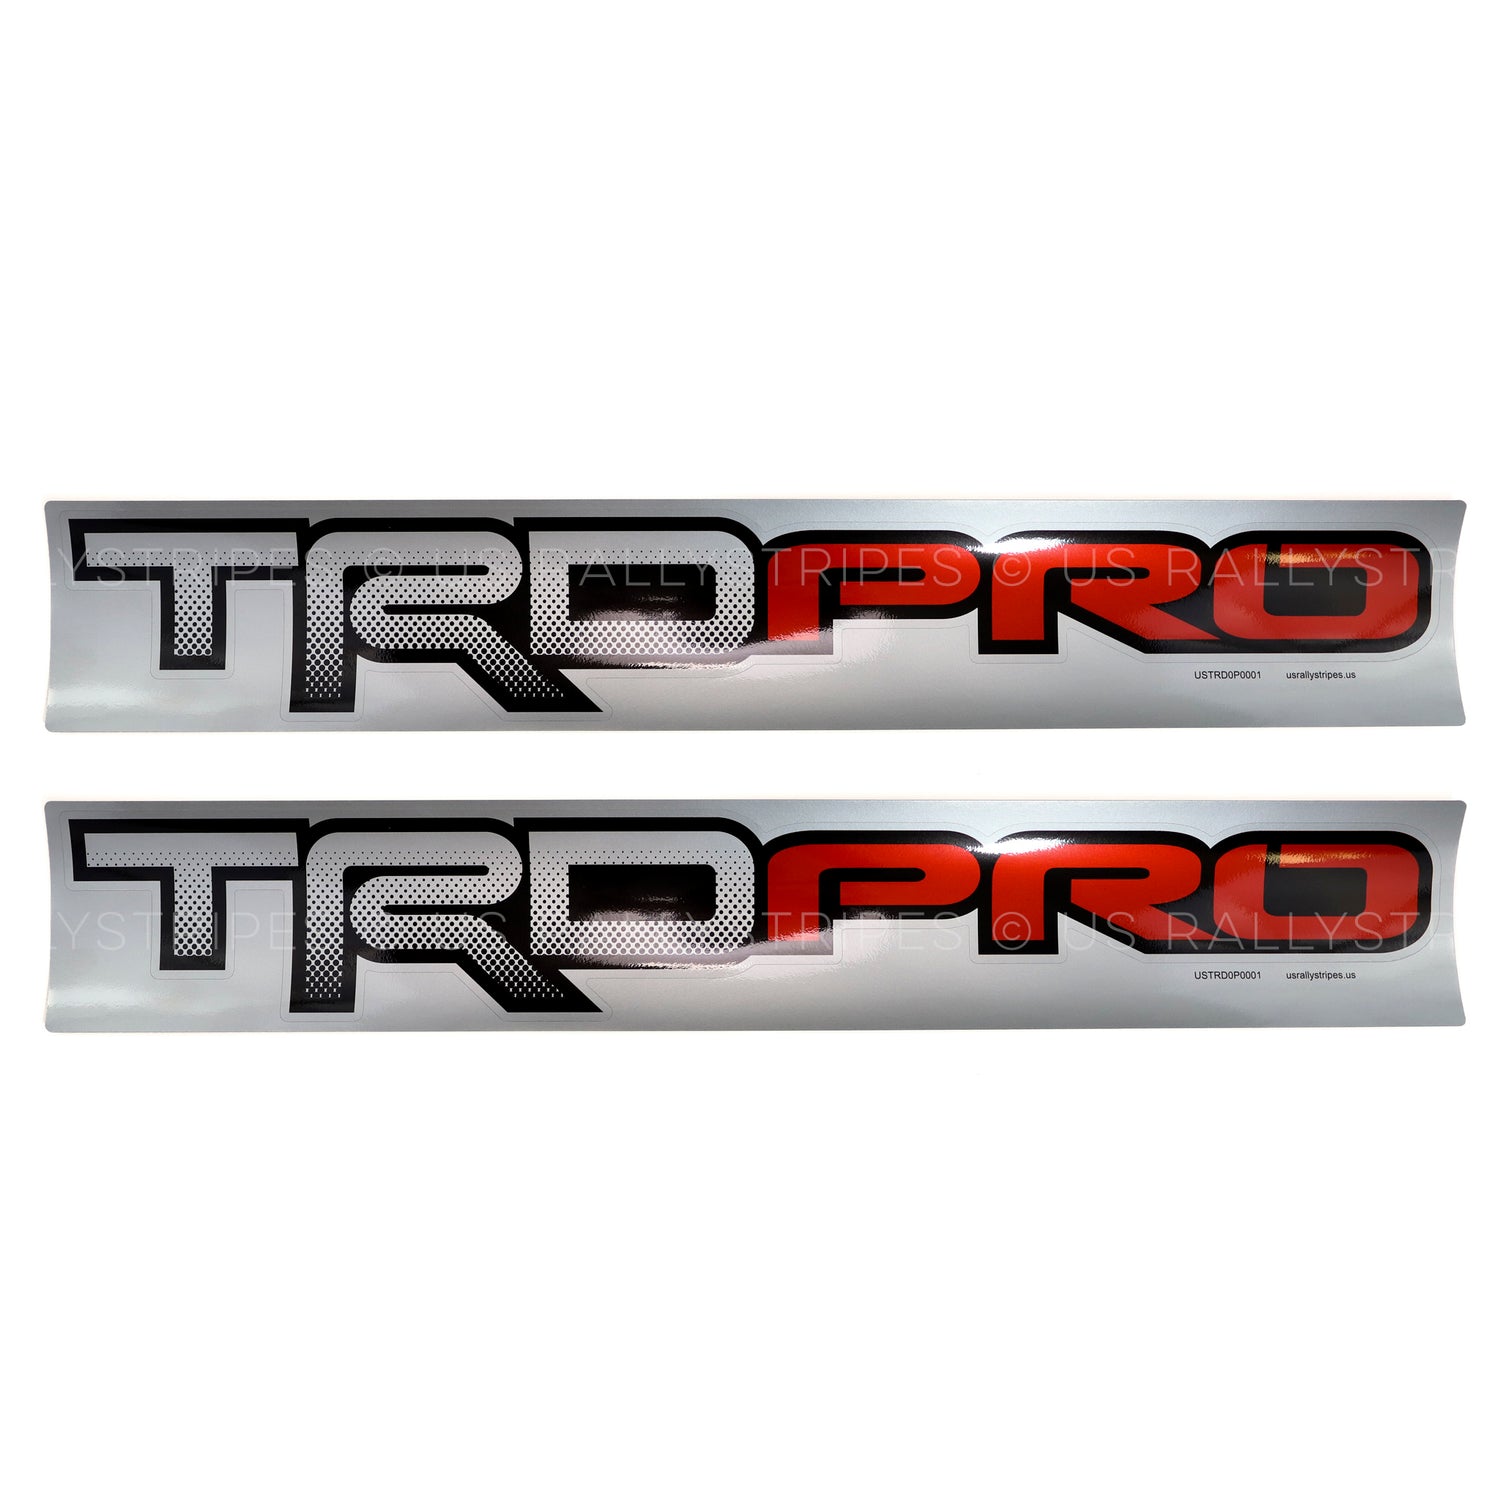 TRD PRO full color decal Toyota Tacoma pickup truck bedside - US Rallystripes